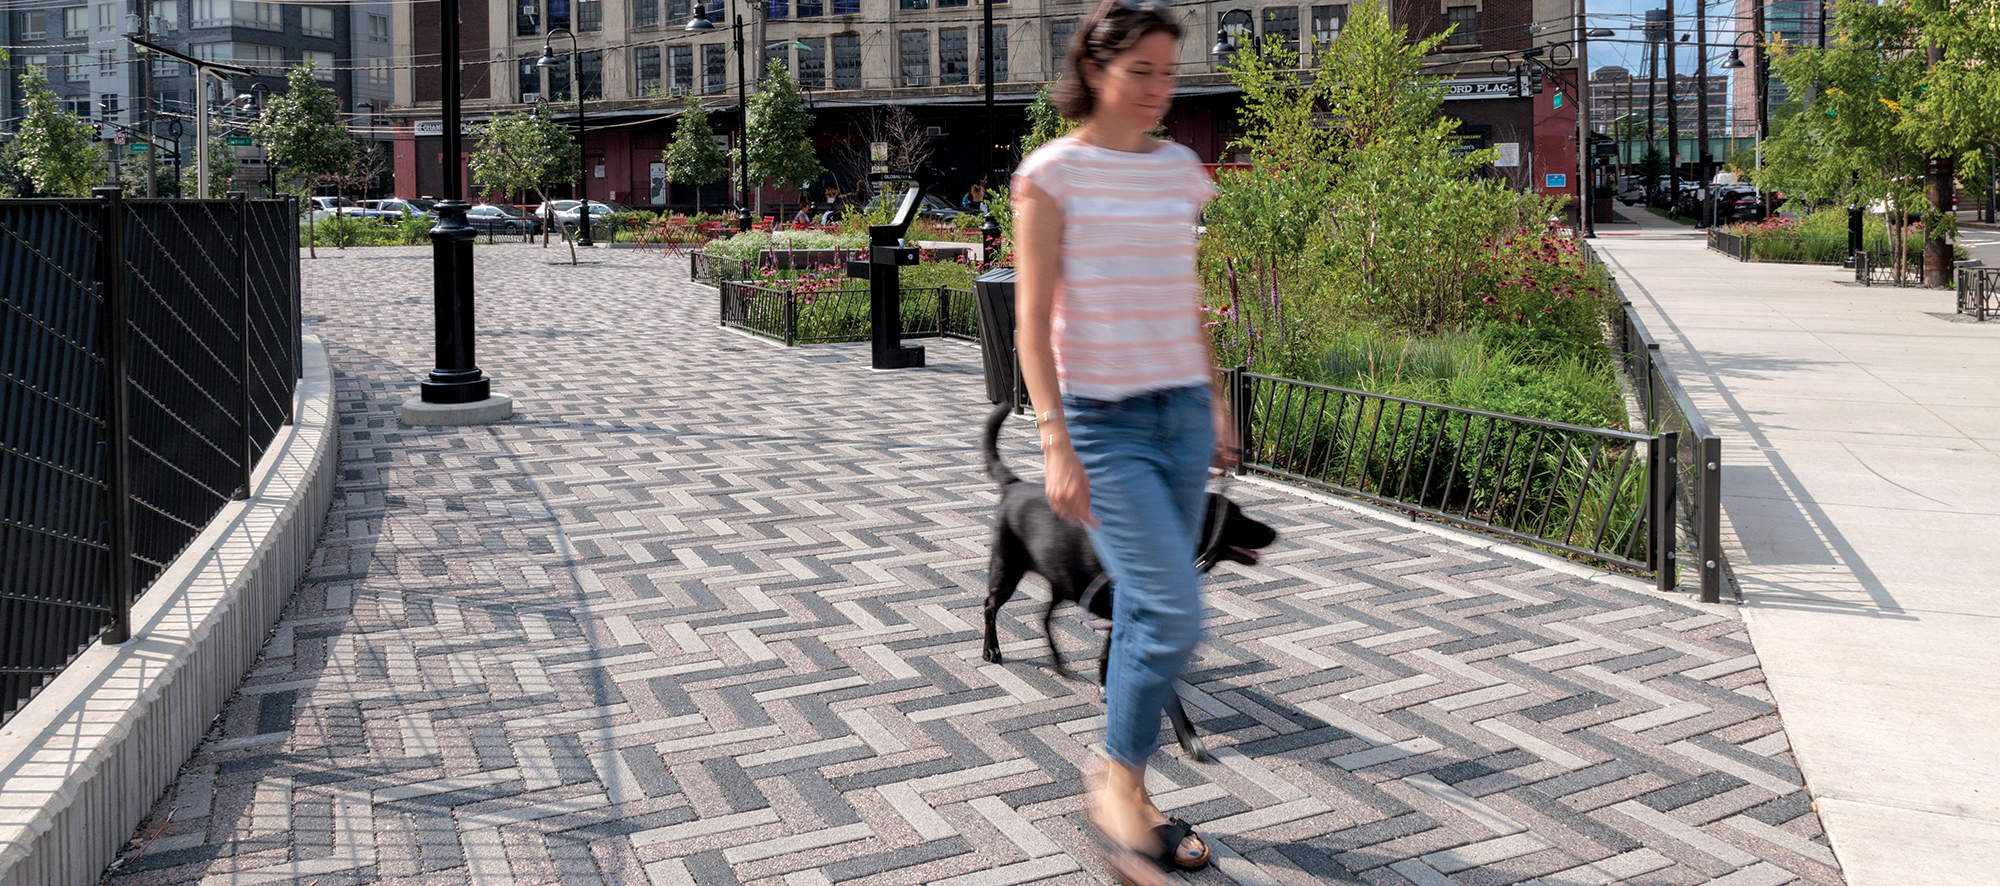 A person walks a dog along a route with Eco-Promenade pavers in three distinct hues arranged in a zigzag pattern to add visual interest.